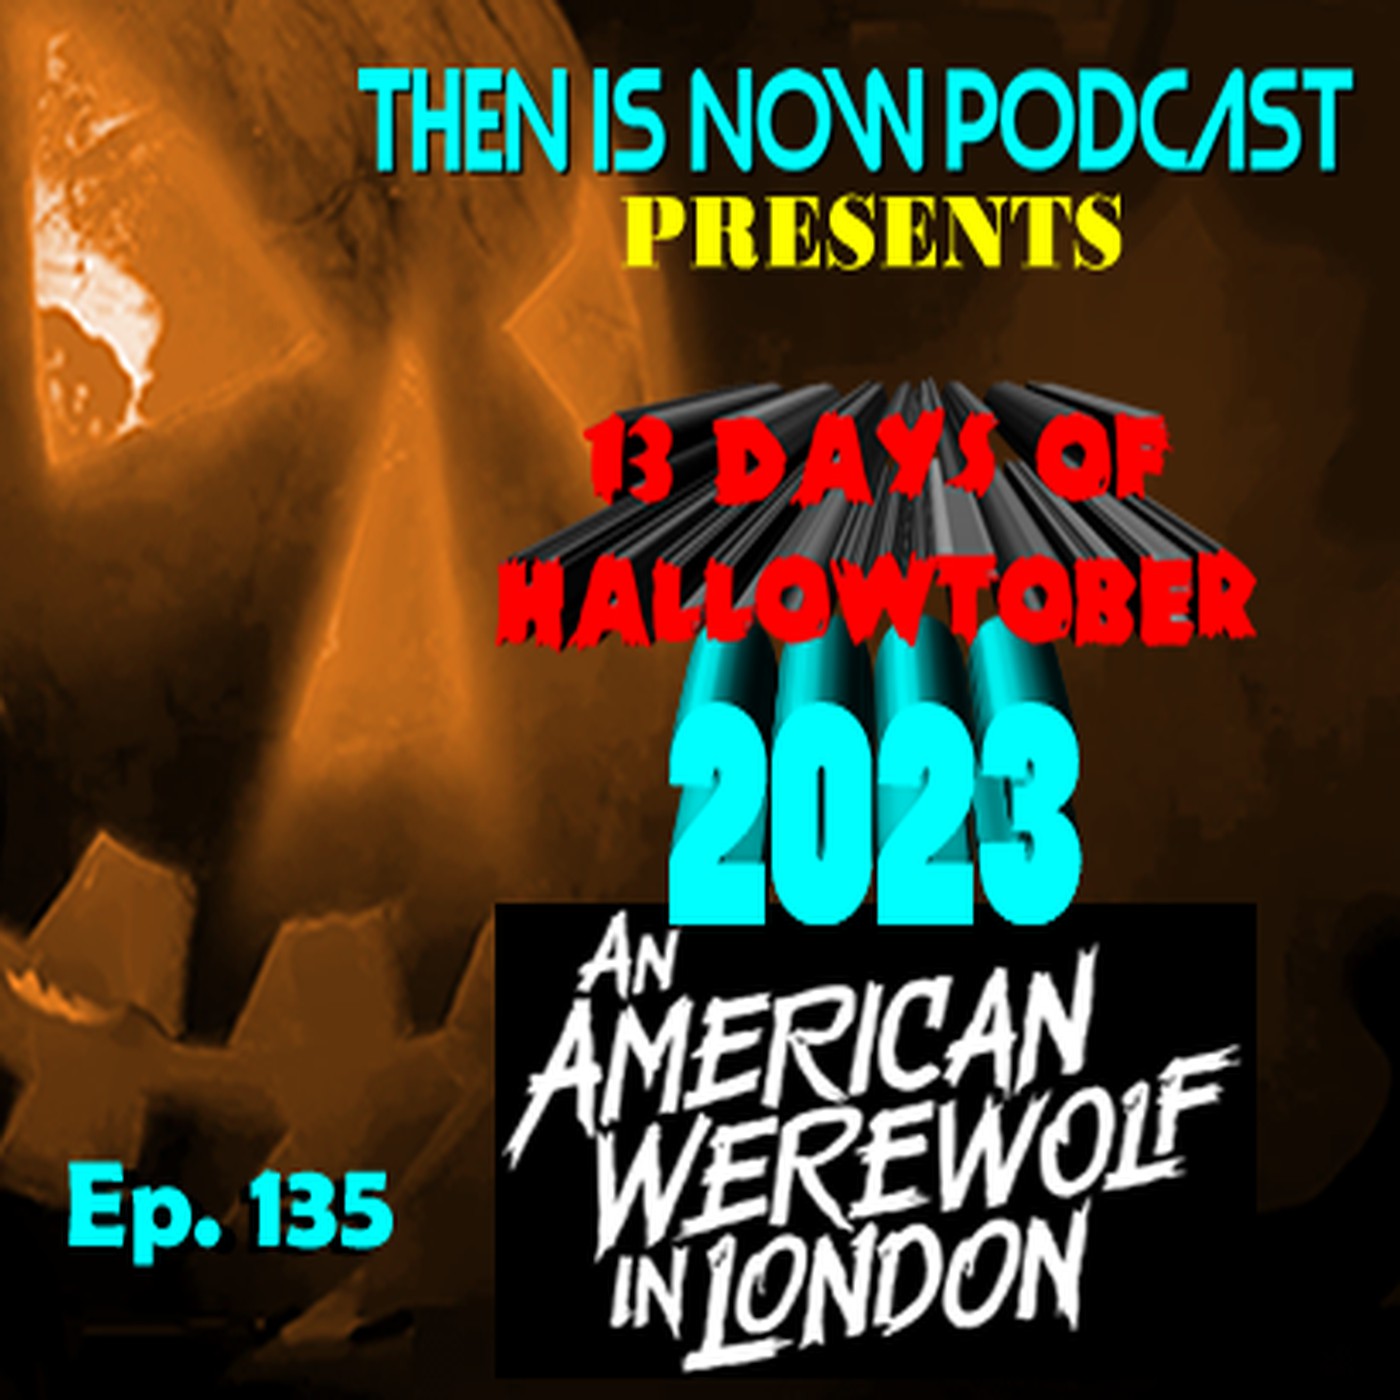 Then Is Now Ep. 135 - 13 Days of Hallowtober 2023 - American Werewolf in London (1981)